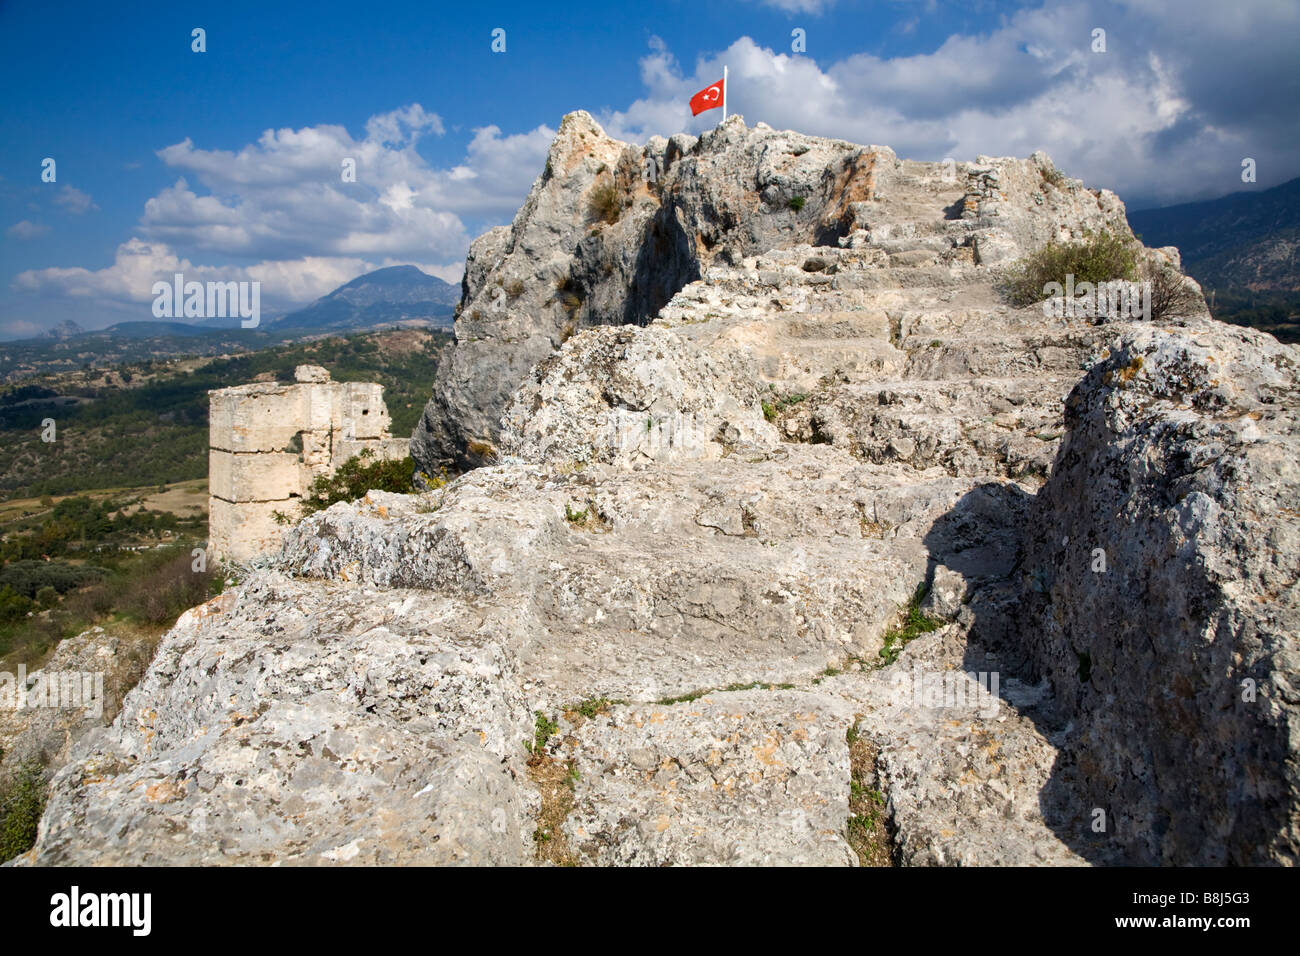 The remains of the ancient stone castle walls of Kanli Agi on Acropolis Hill in Tlos Turkey Stock Photo